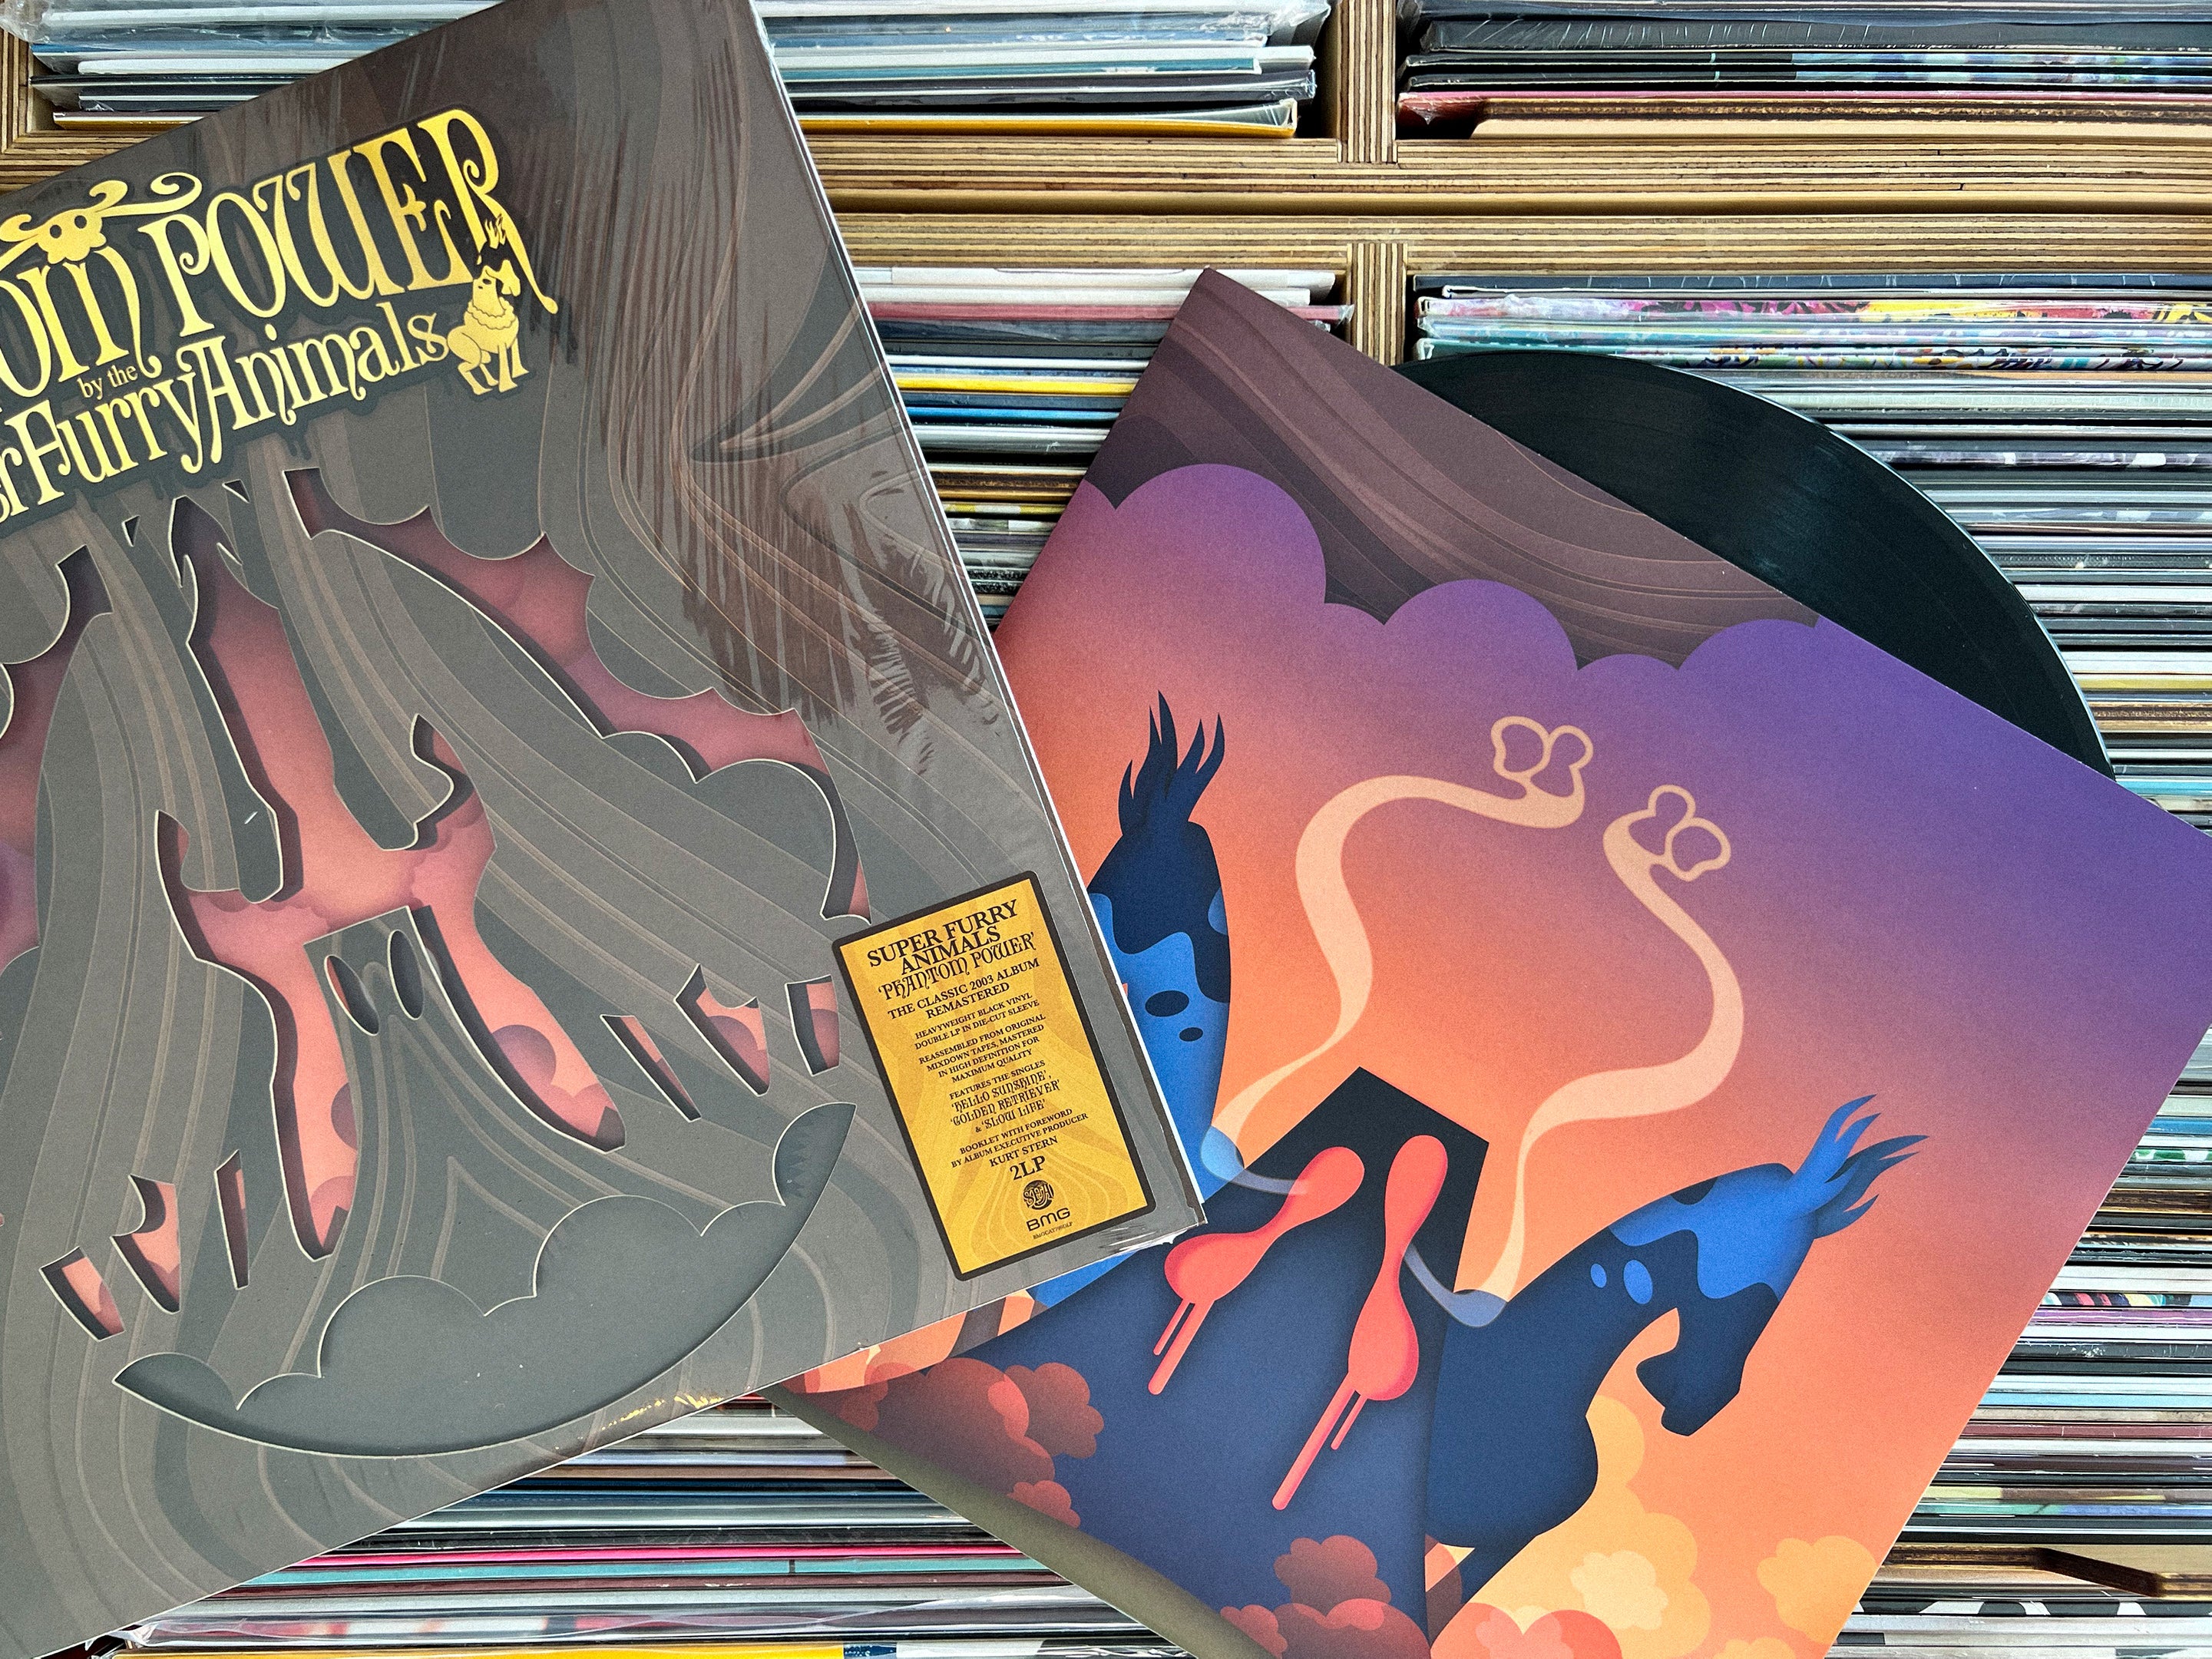 Best New Reissues: Super Furry Animals, Sarah Davachi, The Postal Service, The Folk Implosion, Leon Russell and Albert Ayler.